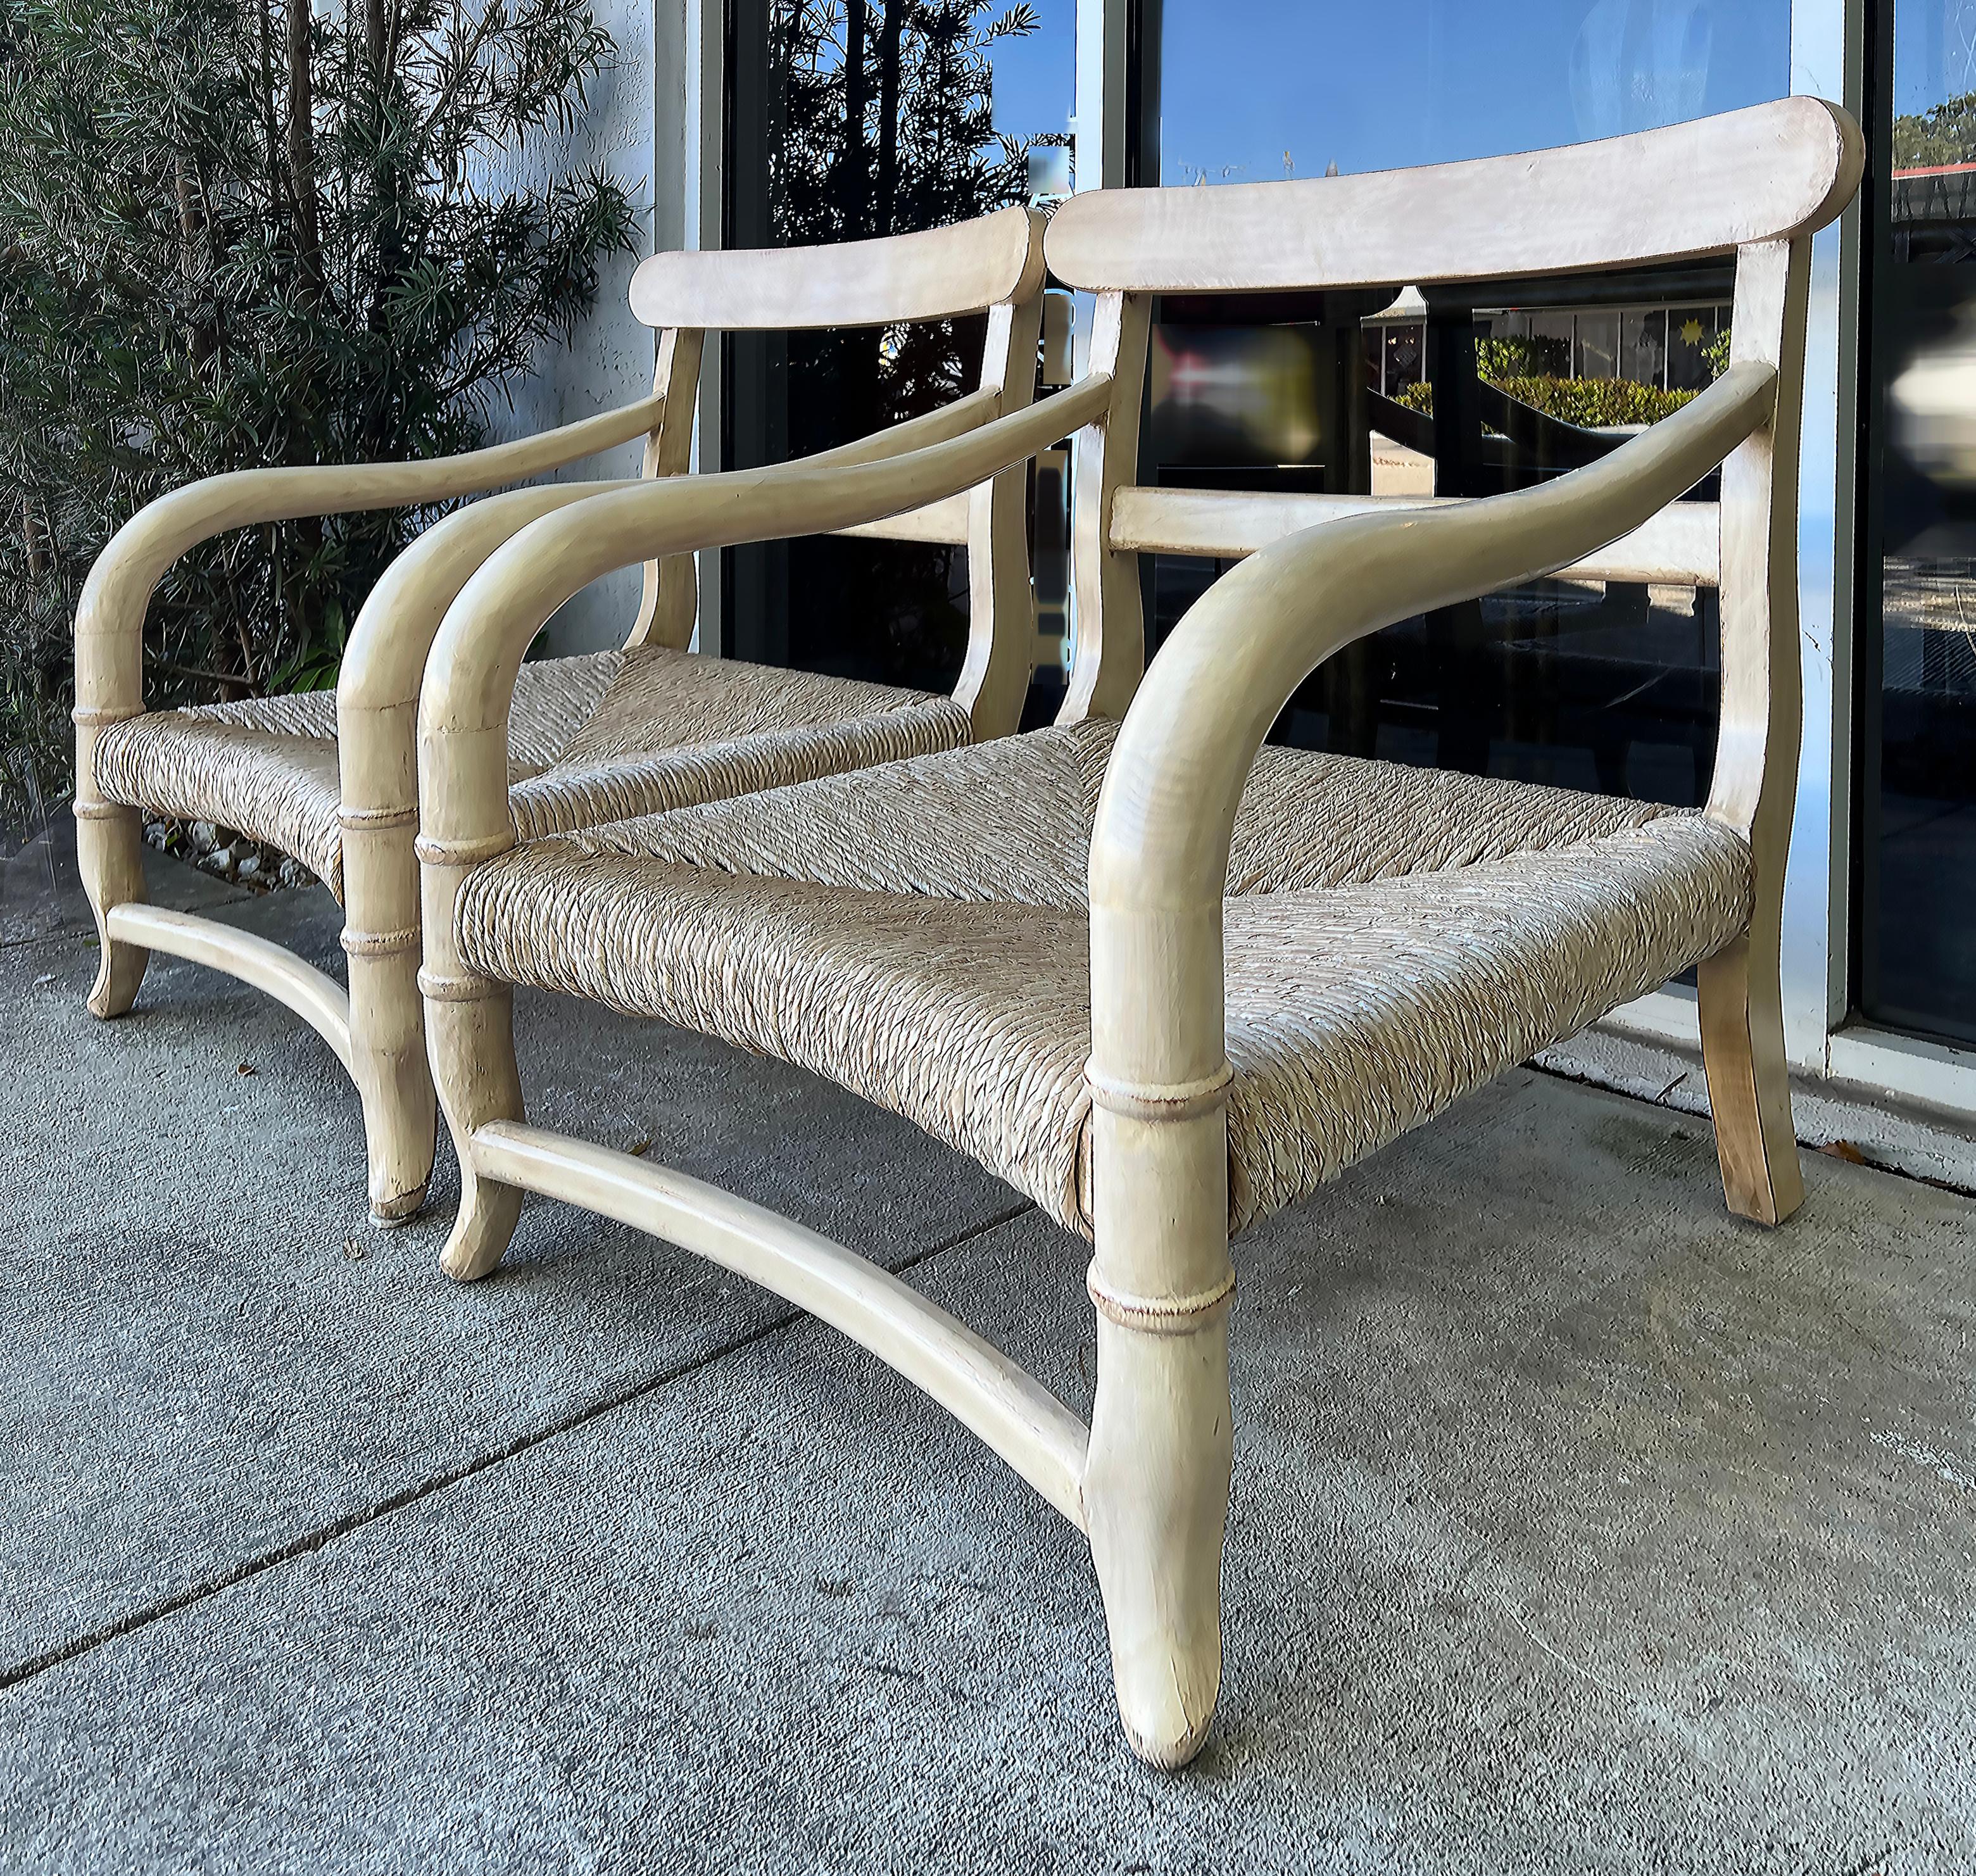 Vintage Low Klismos Armchairs with Rush Seats, Washed Distressed Finish 

Offered for sale is a pair of low Klismos Empire-style lounge armchairs with woven rush seats. The chairs have an intentionally washed and distressed finish.  They have a